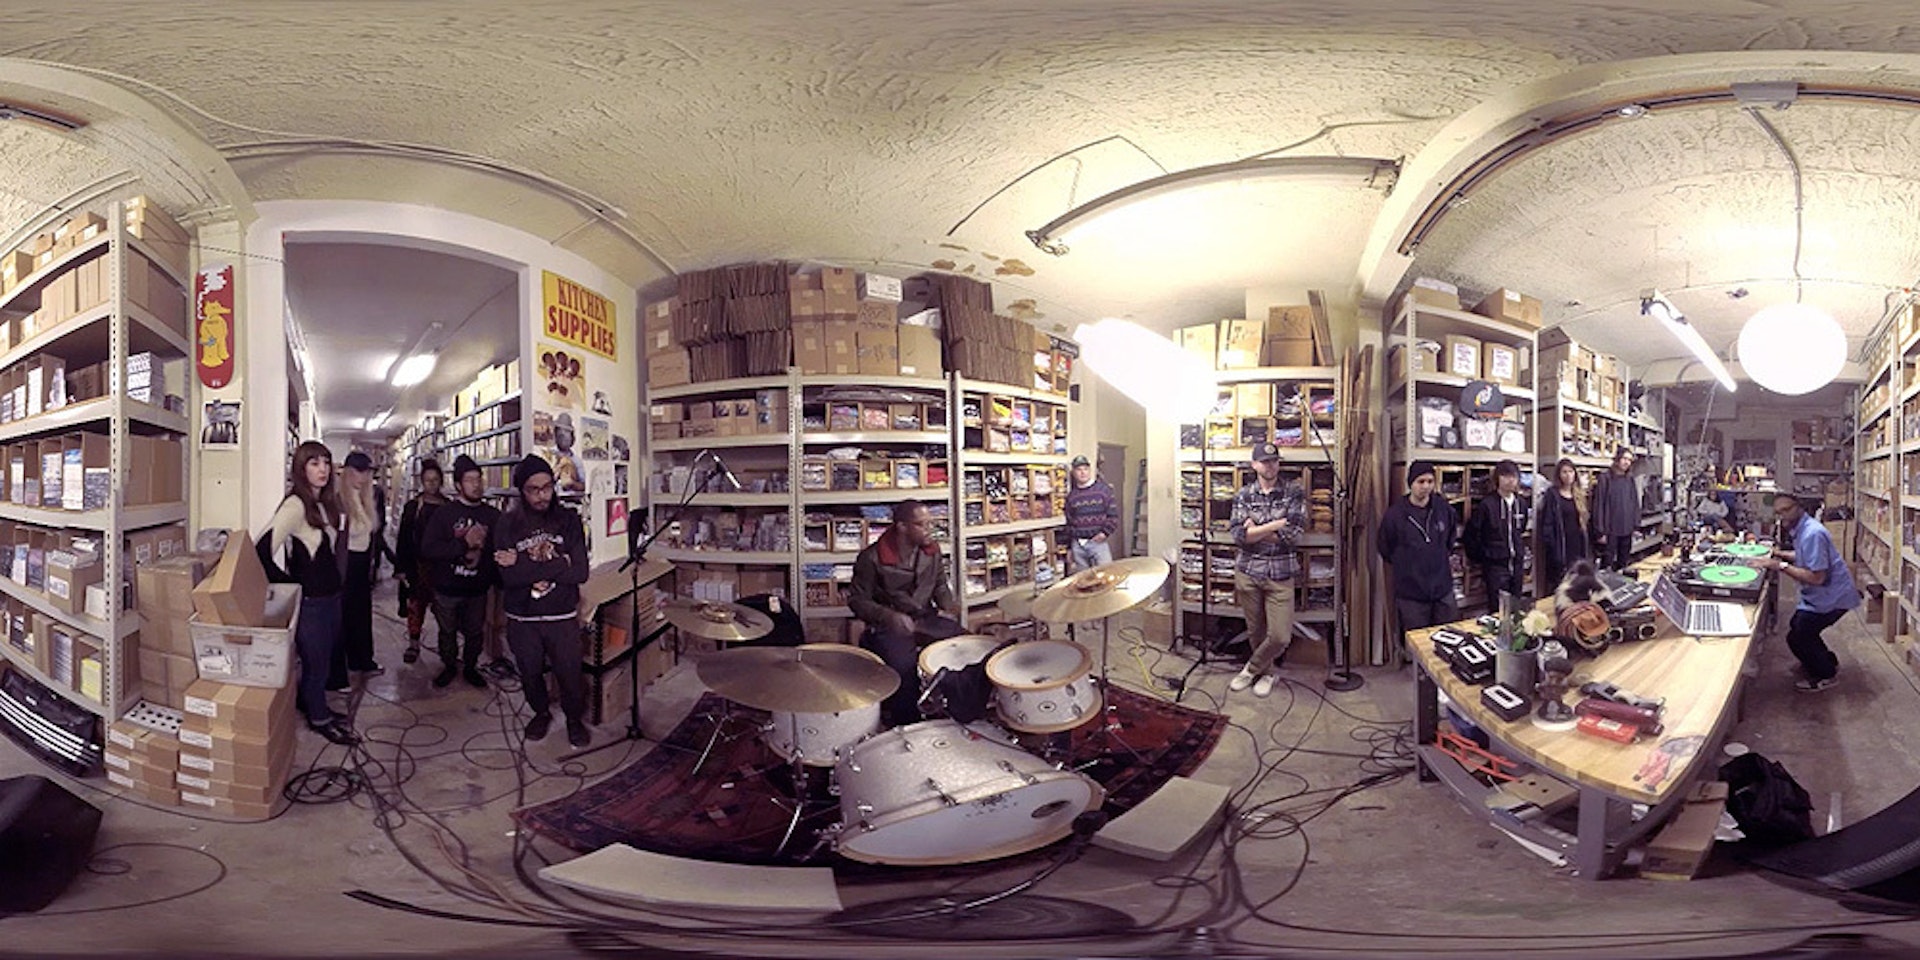 Video: Stones Throw Records’ 360-degree virtual reality tribute to the late great J Dilla